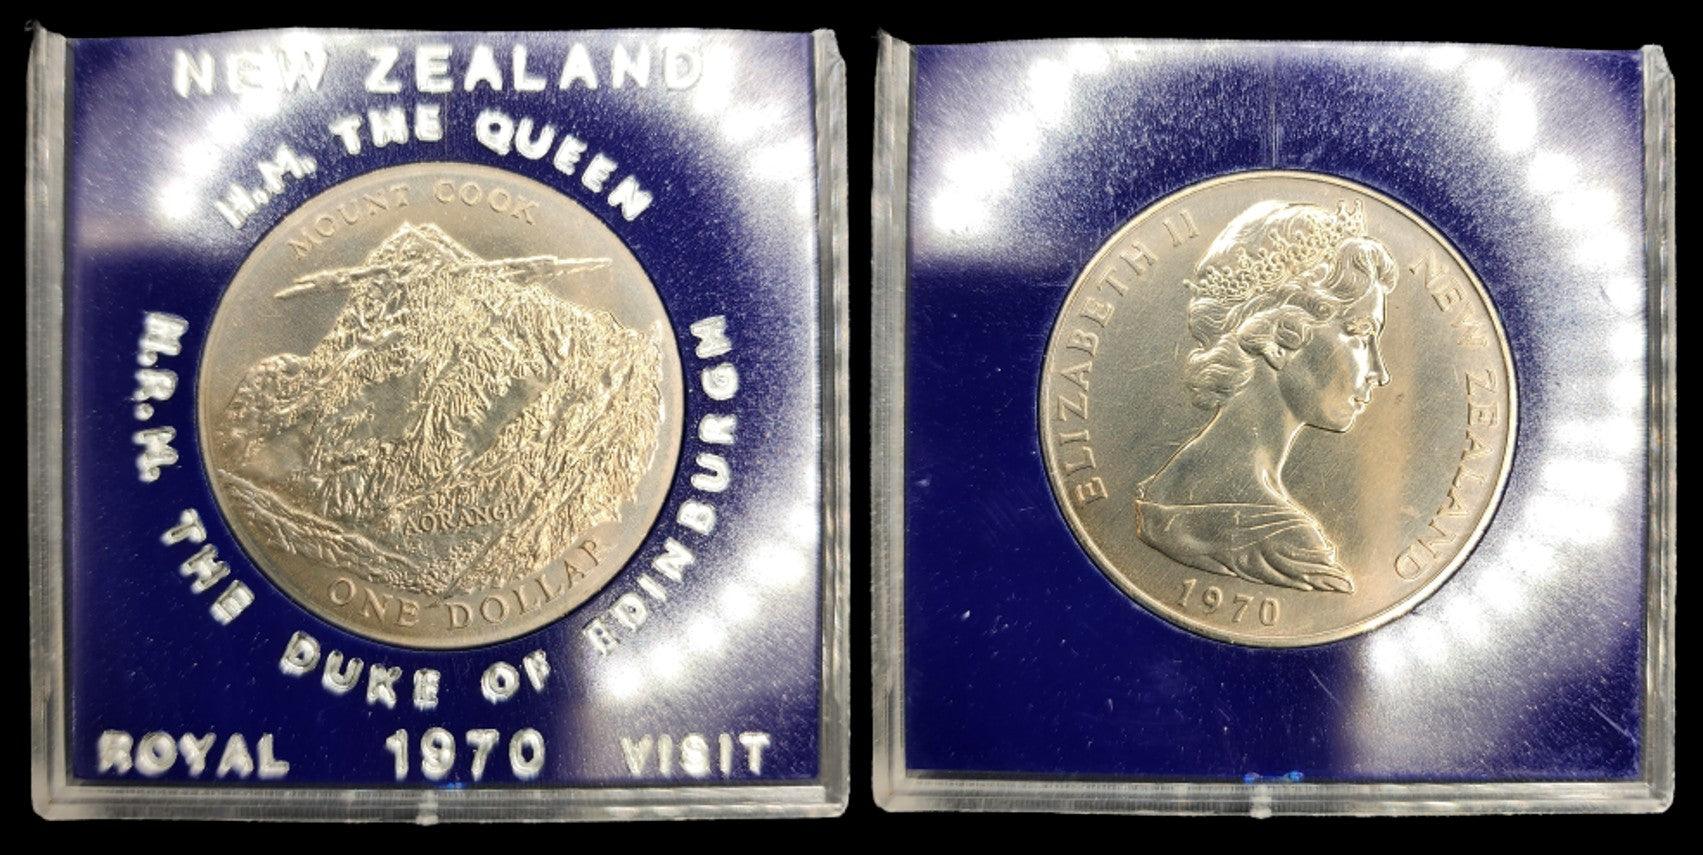 1970 New Zealand One Dollar Coin - Royal Visit Commemorative Dollar - In Original Case - Loose Change Coins